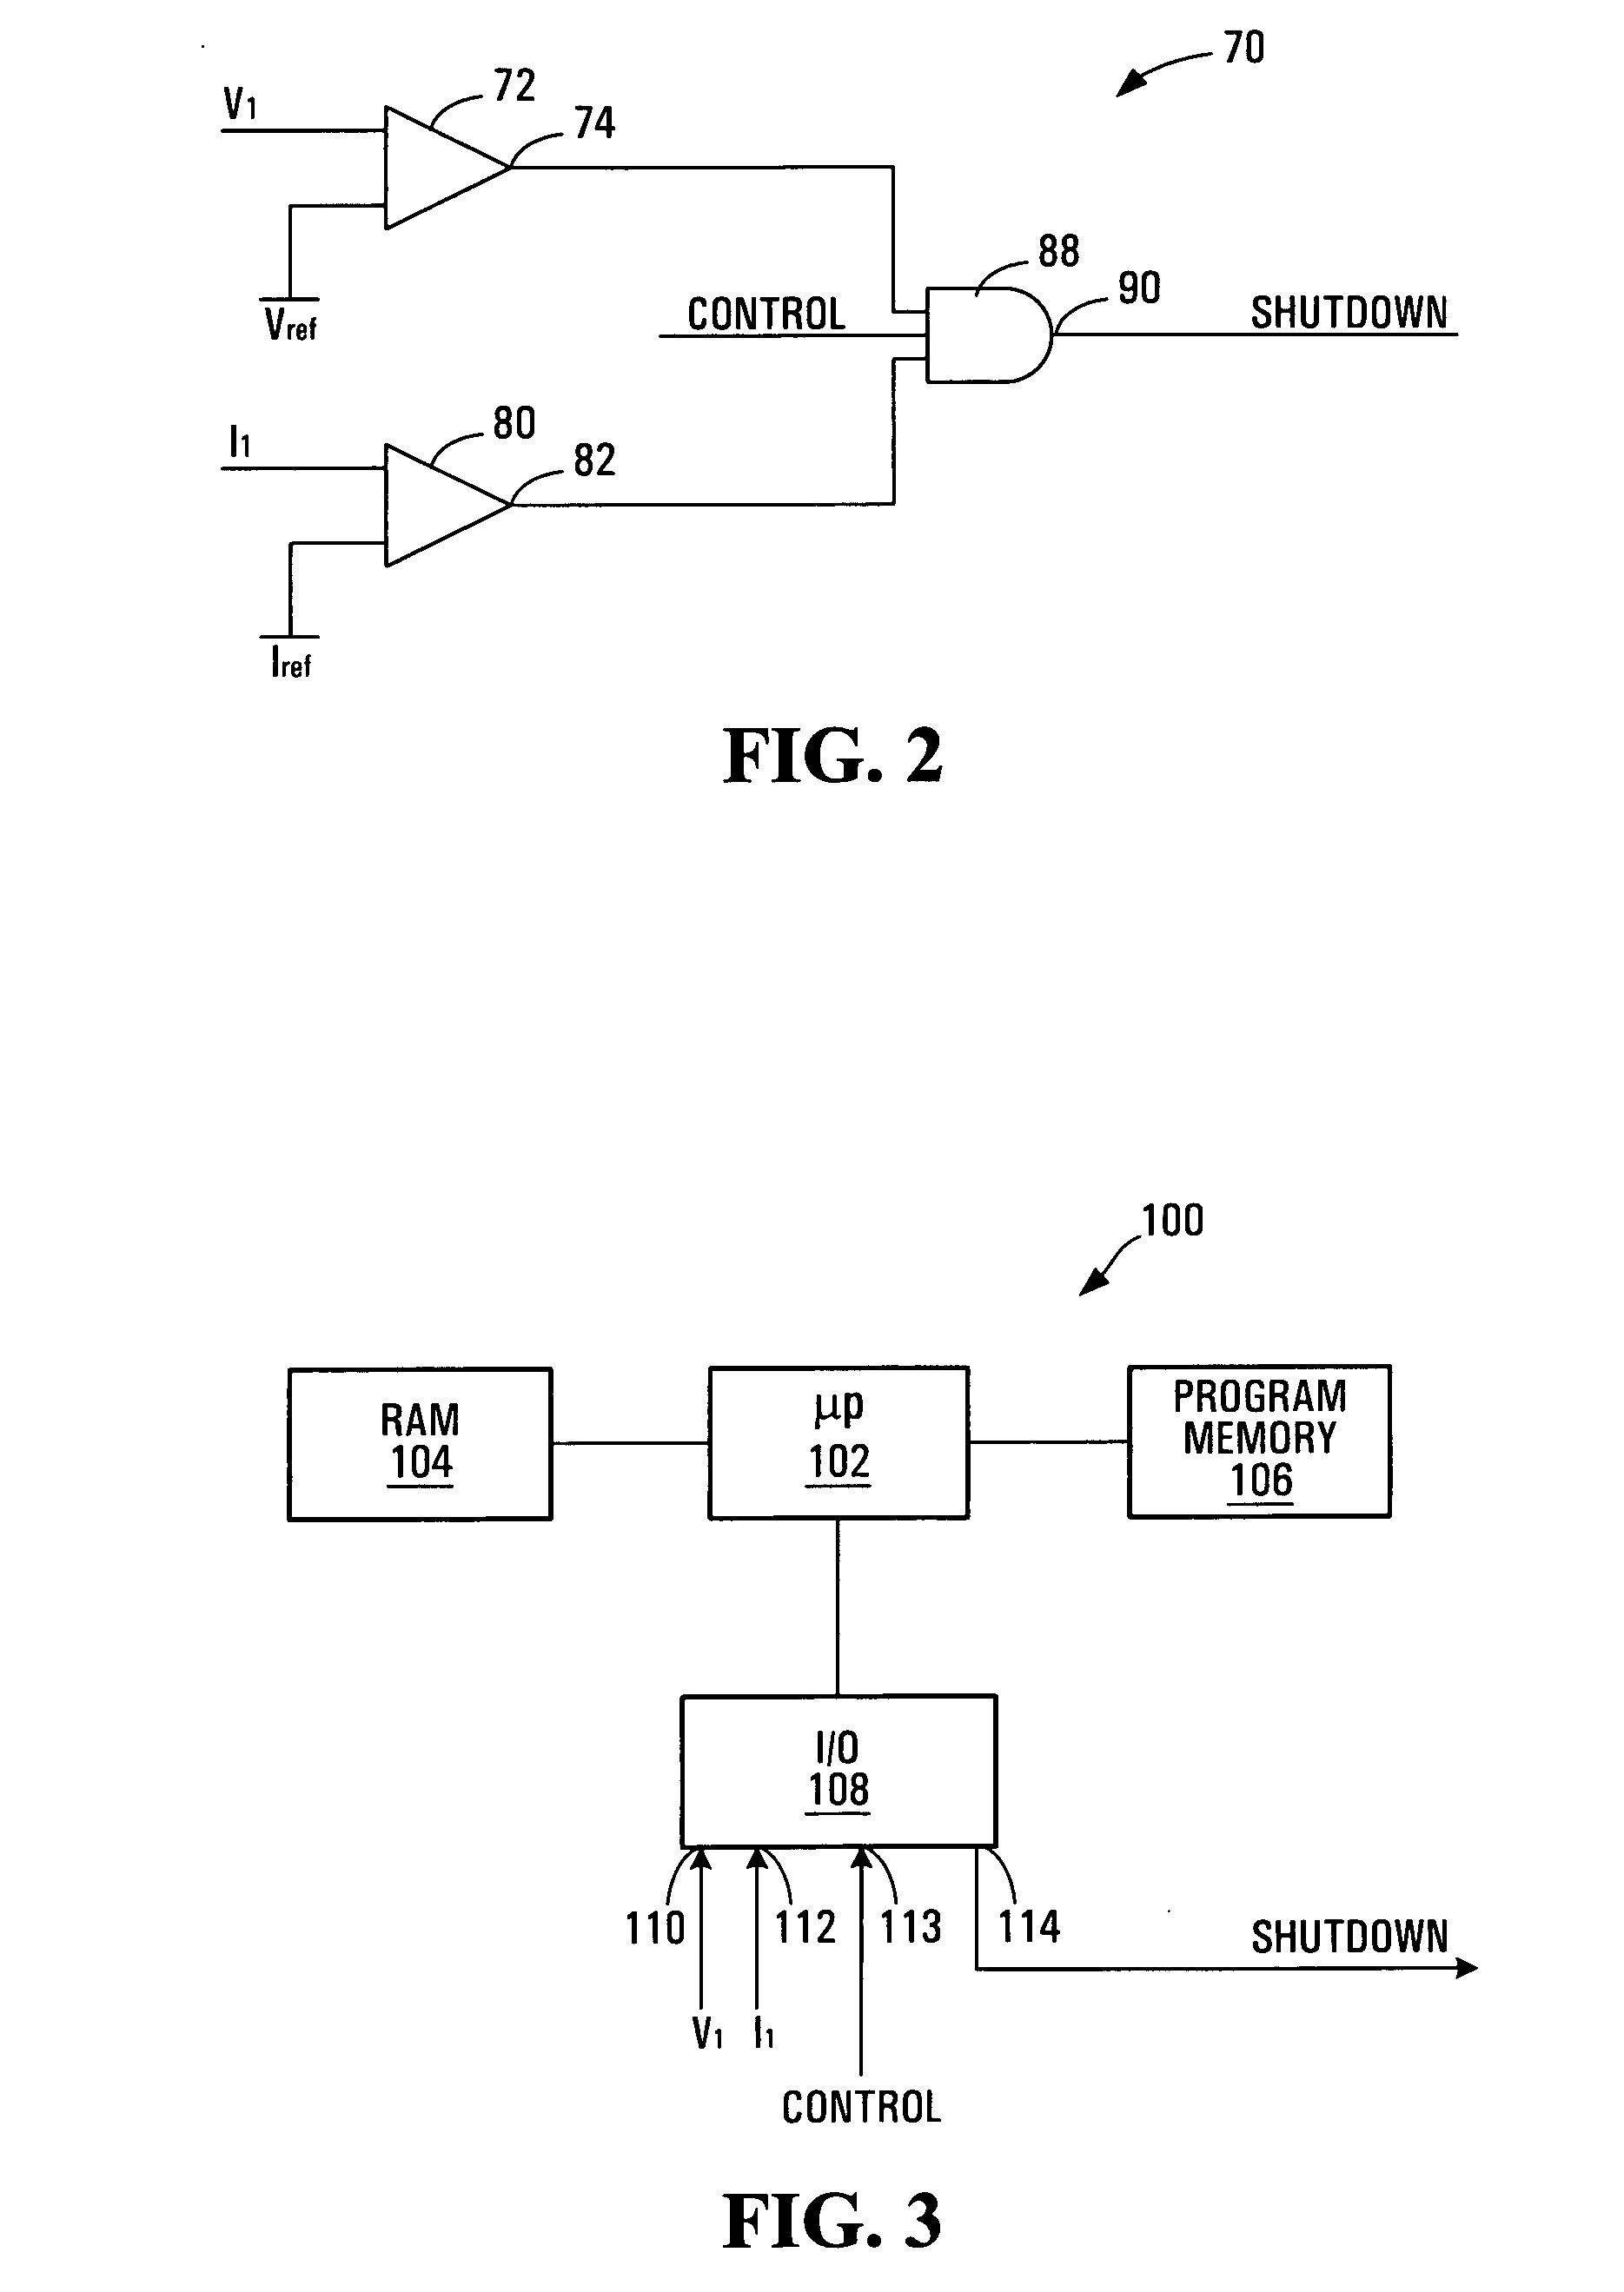 AC power backfeed protection based on voltage